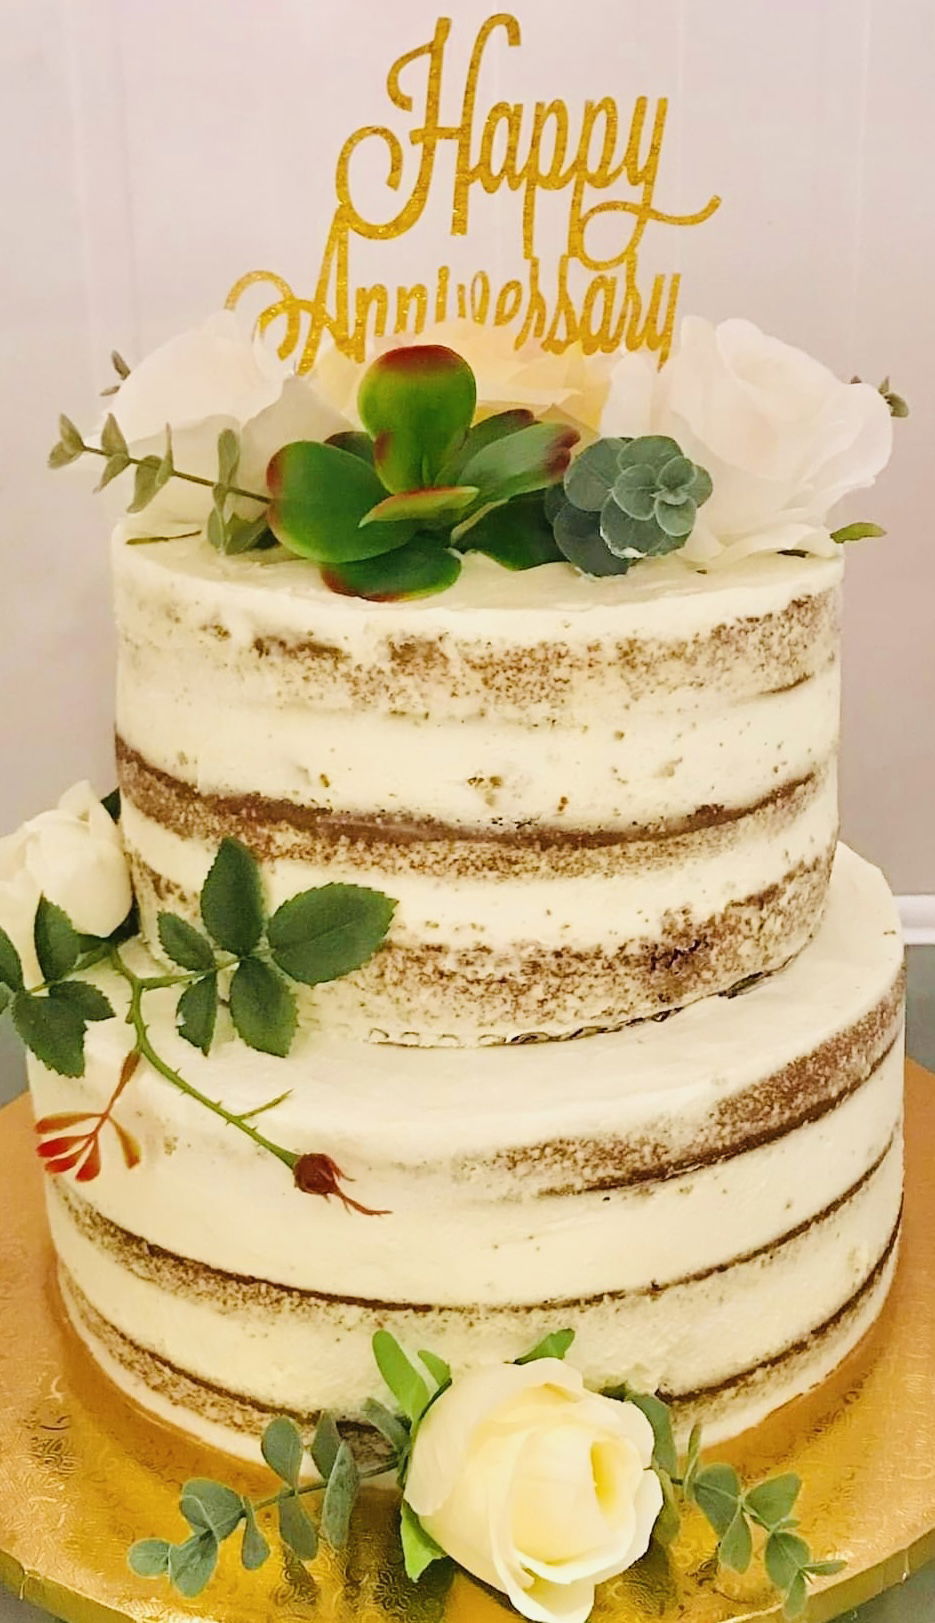 2 Tier Vanilla Rustic Anniversary Cake With Buttercream Frosting